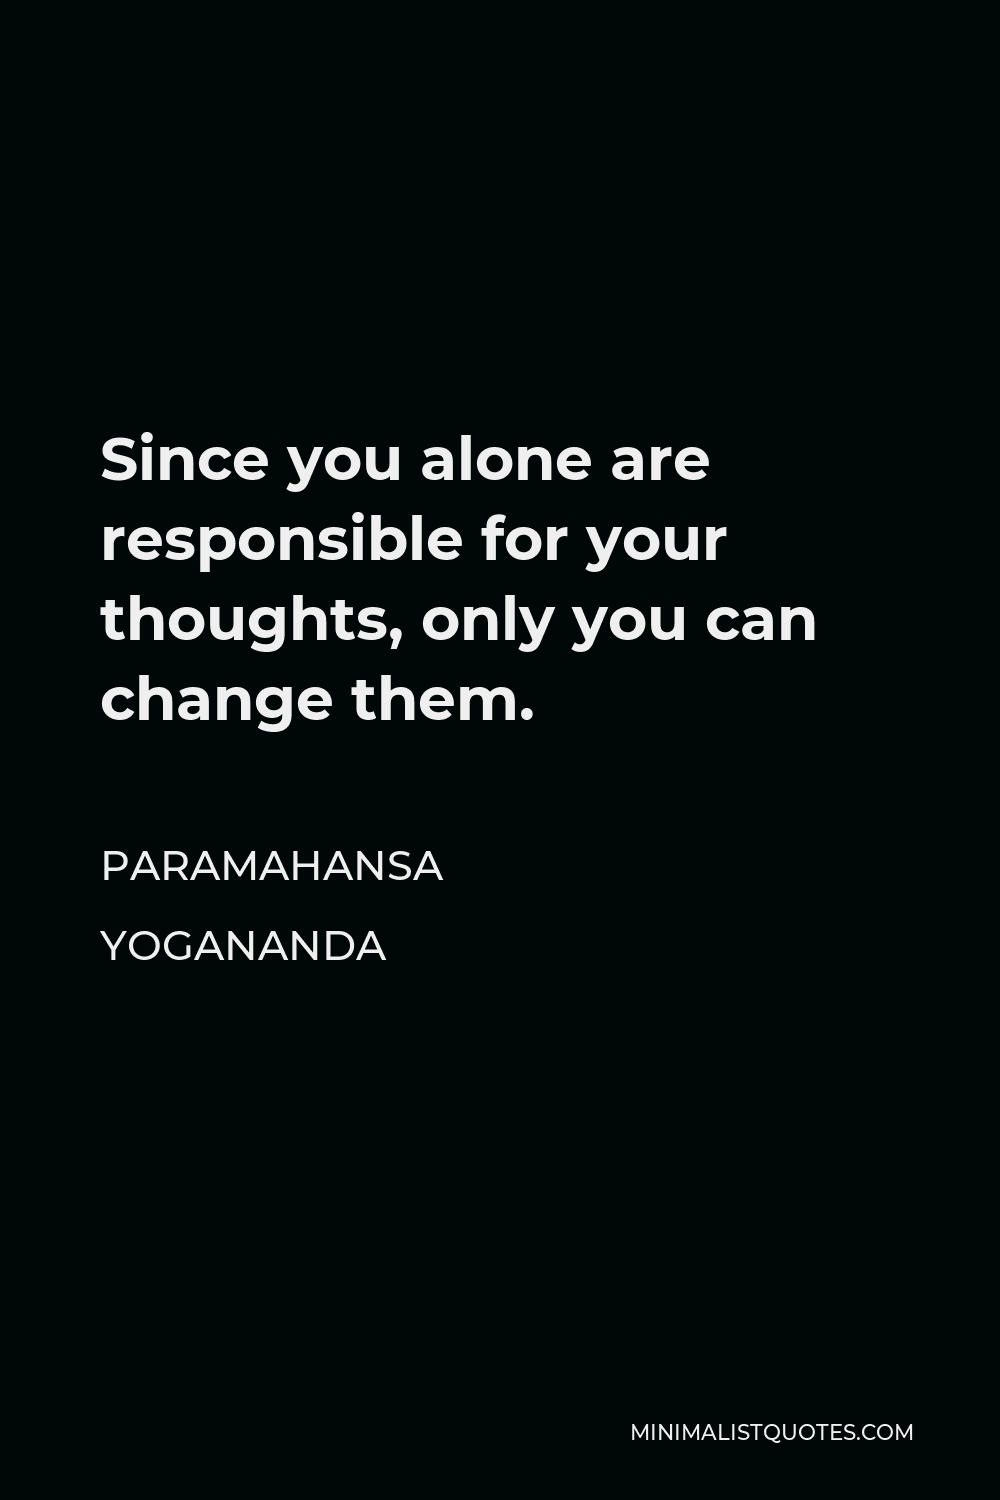 Paramahansa Yogananda Quote - Since you alone are responsible for your thoughts, only you can change them.